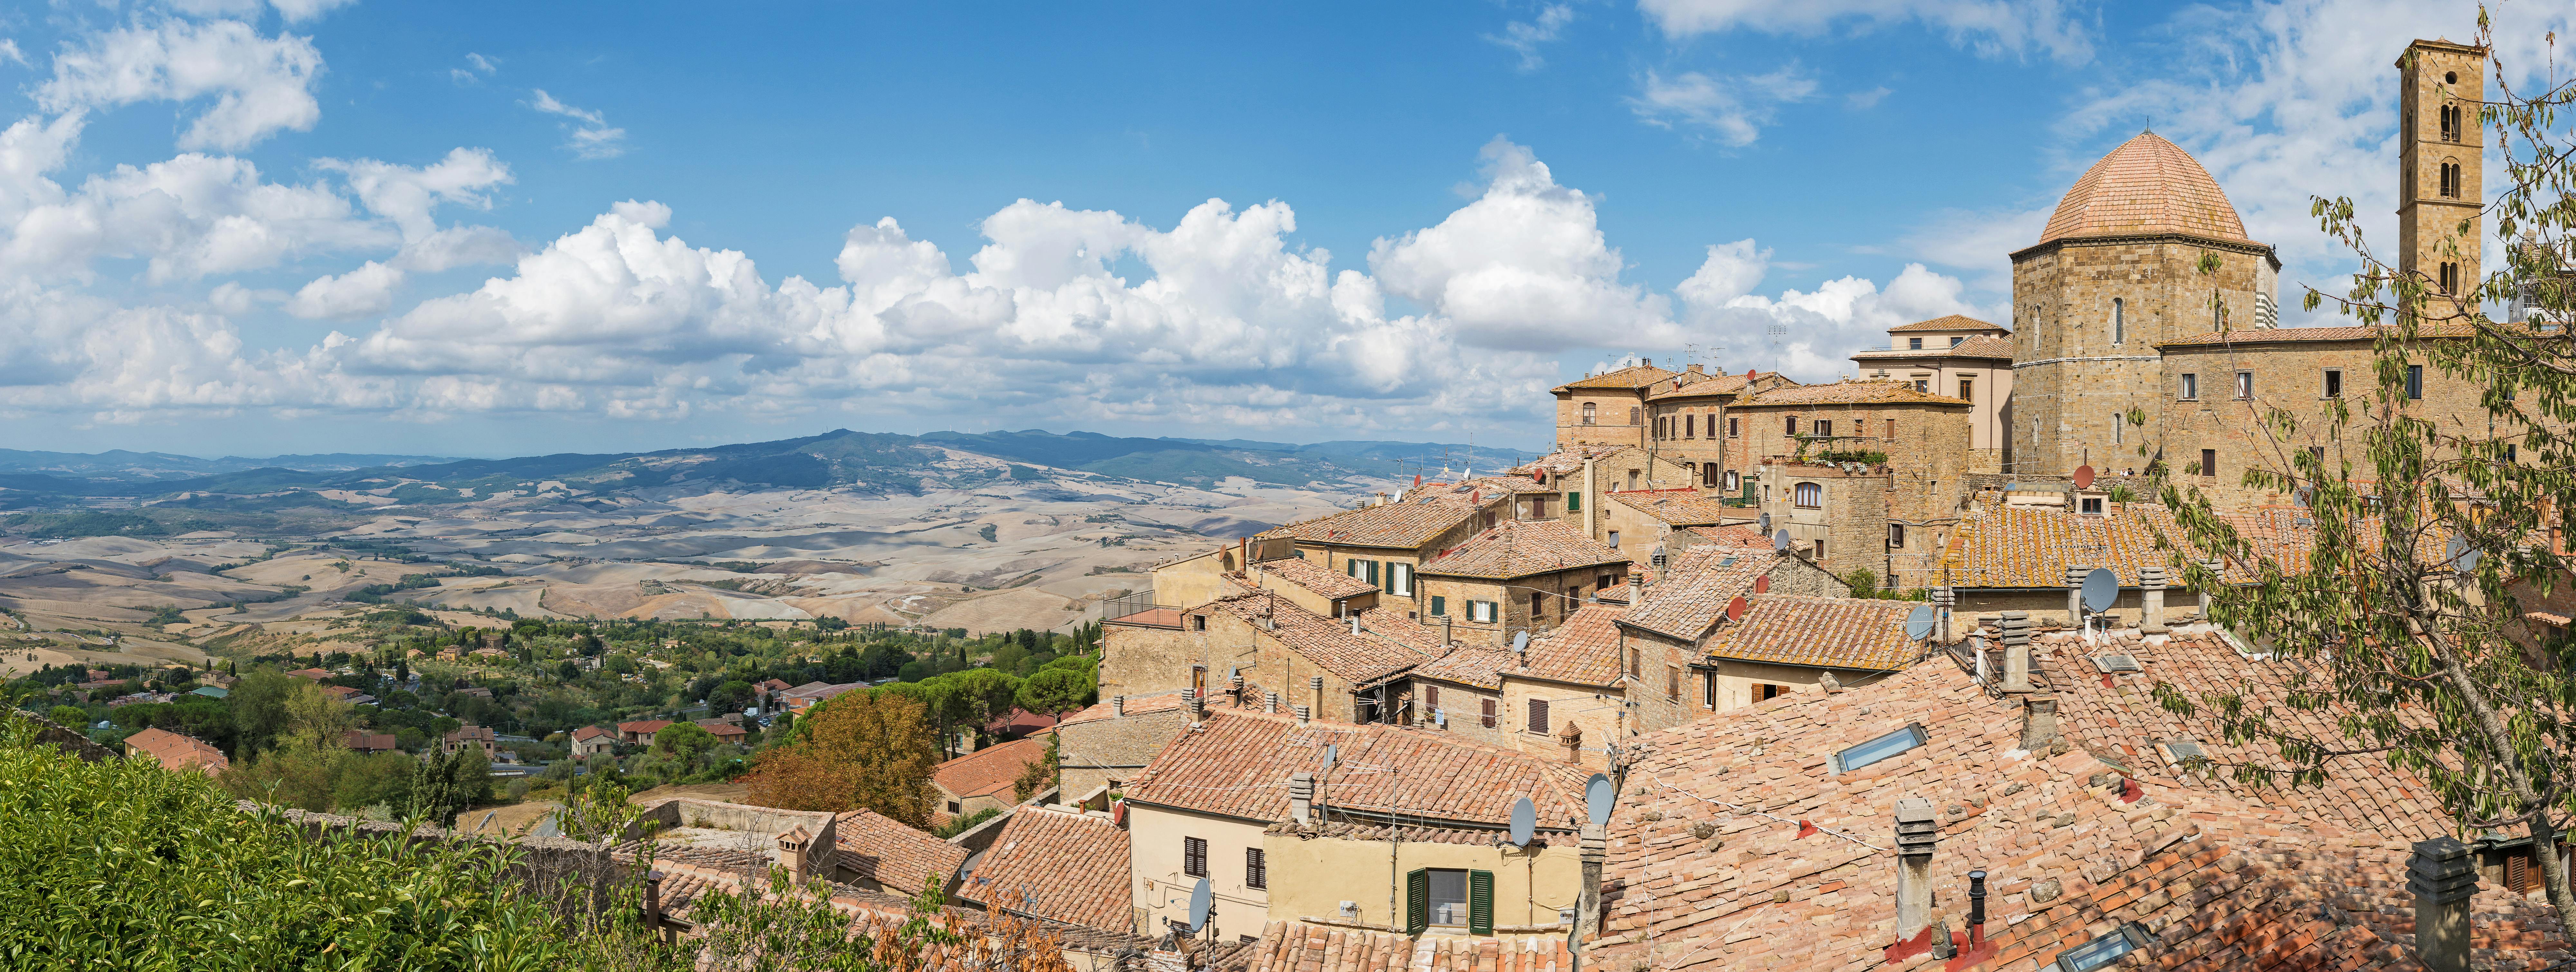 Private tour of Volterra from Florence